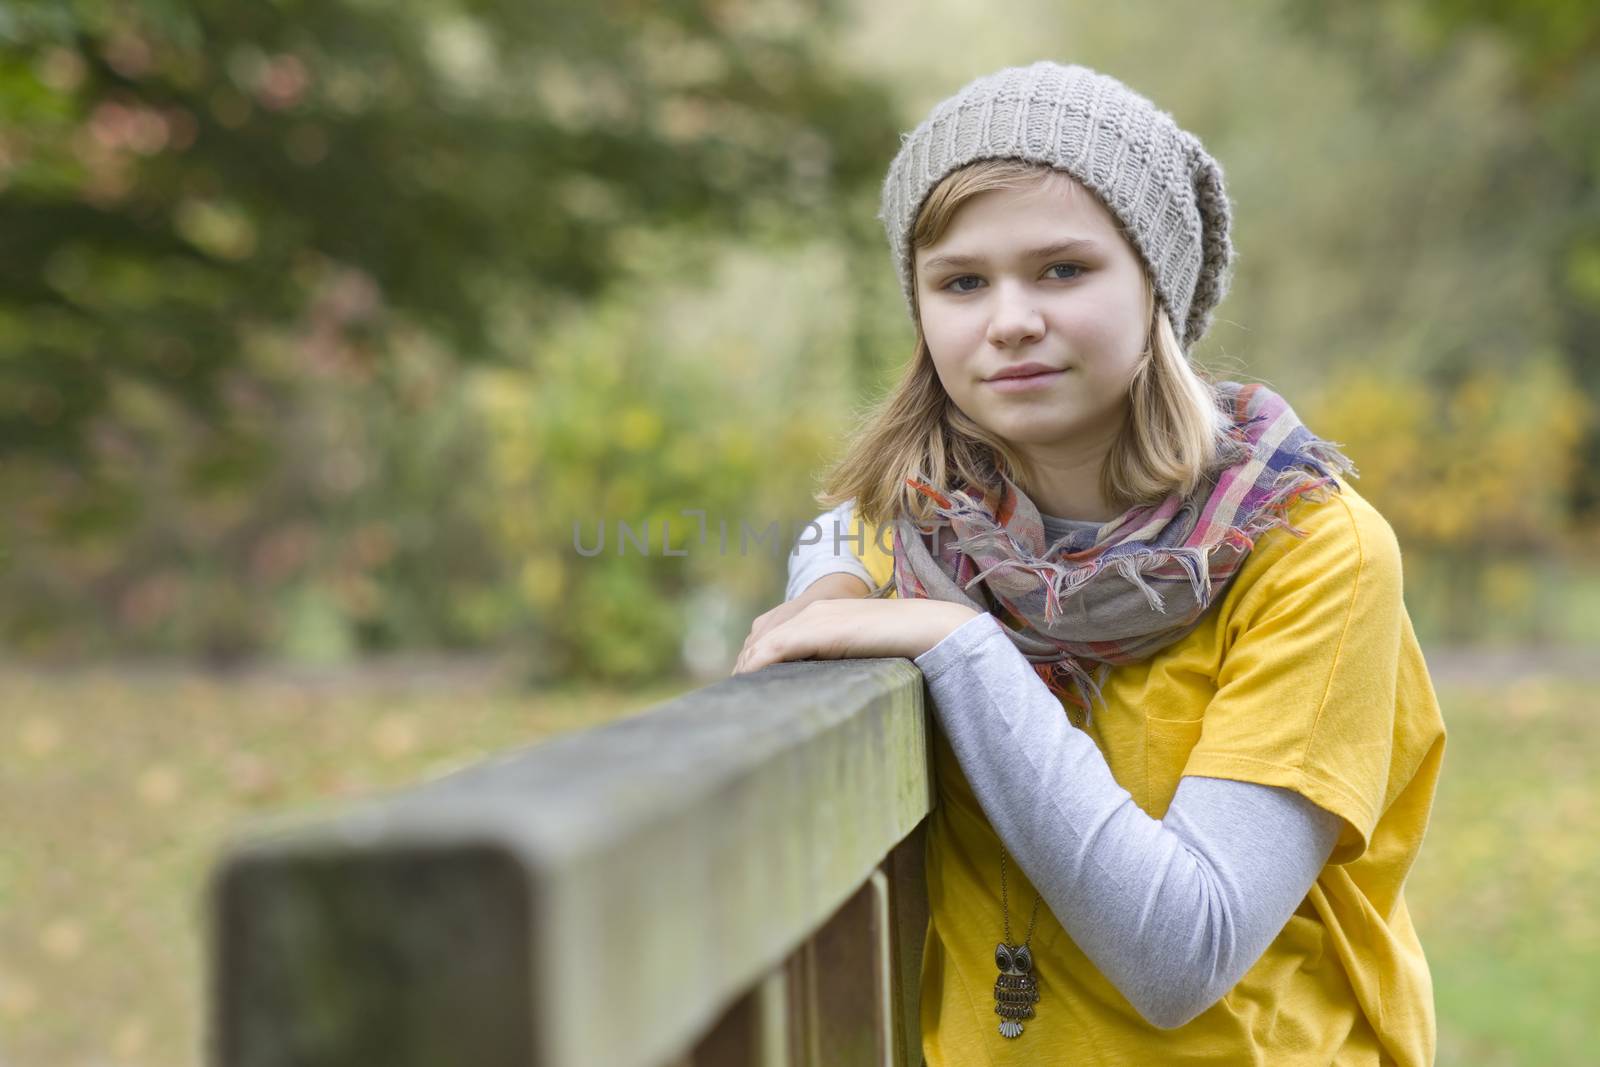 young girl in the autumn park - portrait